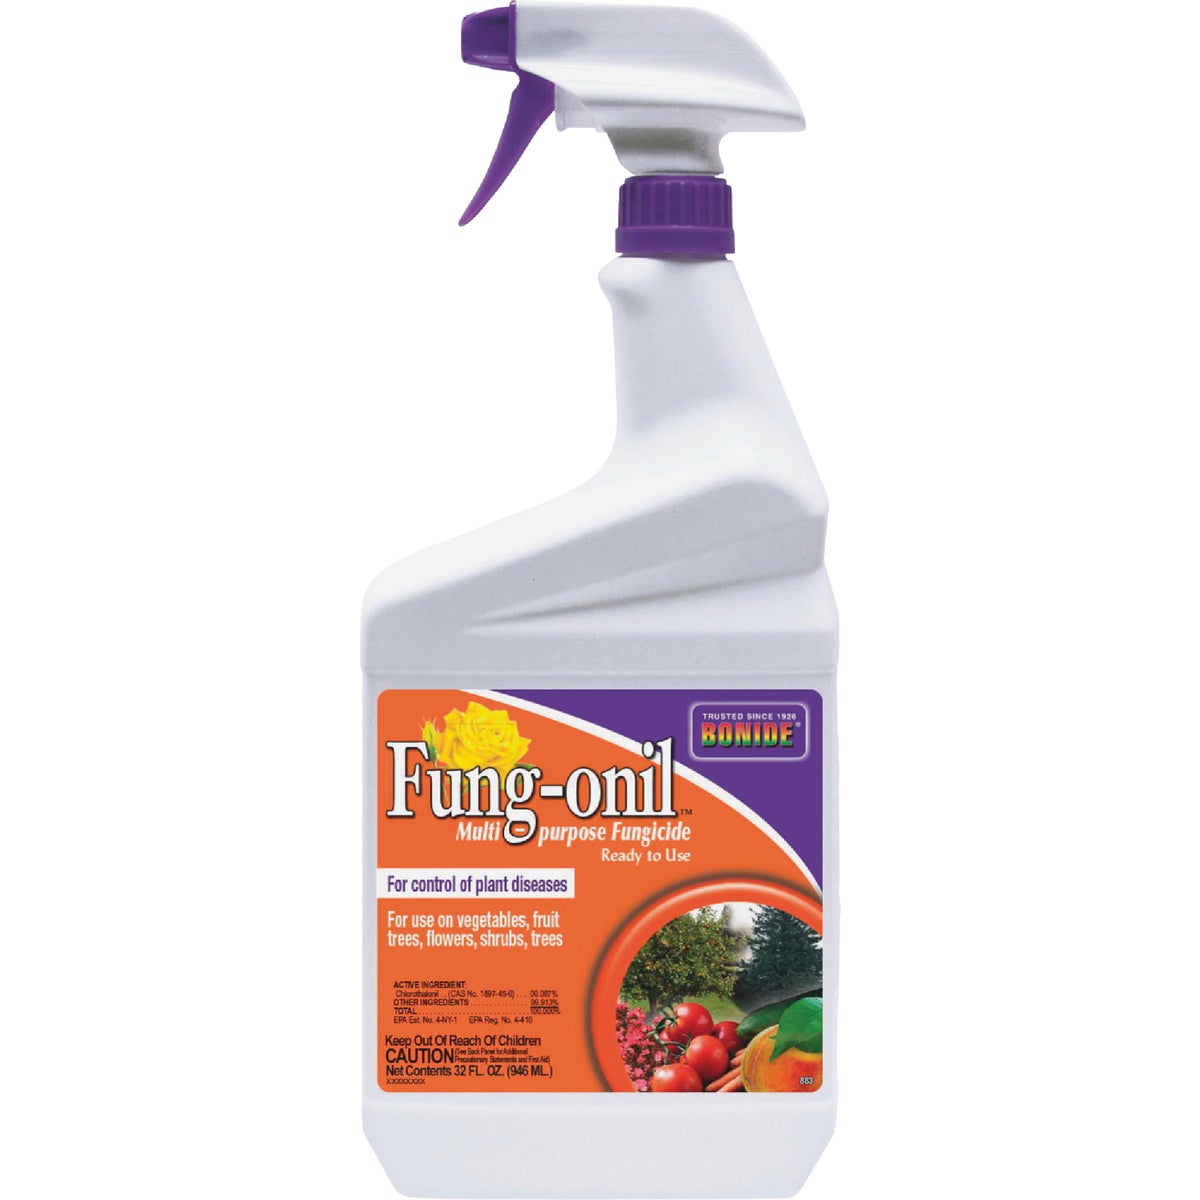 Item 764116, Control fungal diseases in your garden with Fung-onil Multi-Purpose 